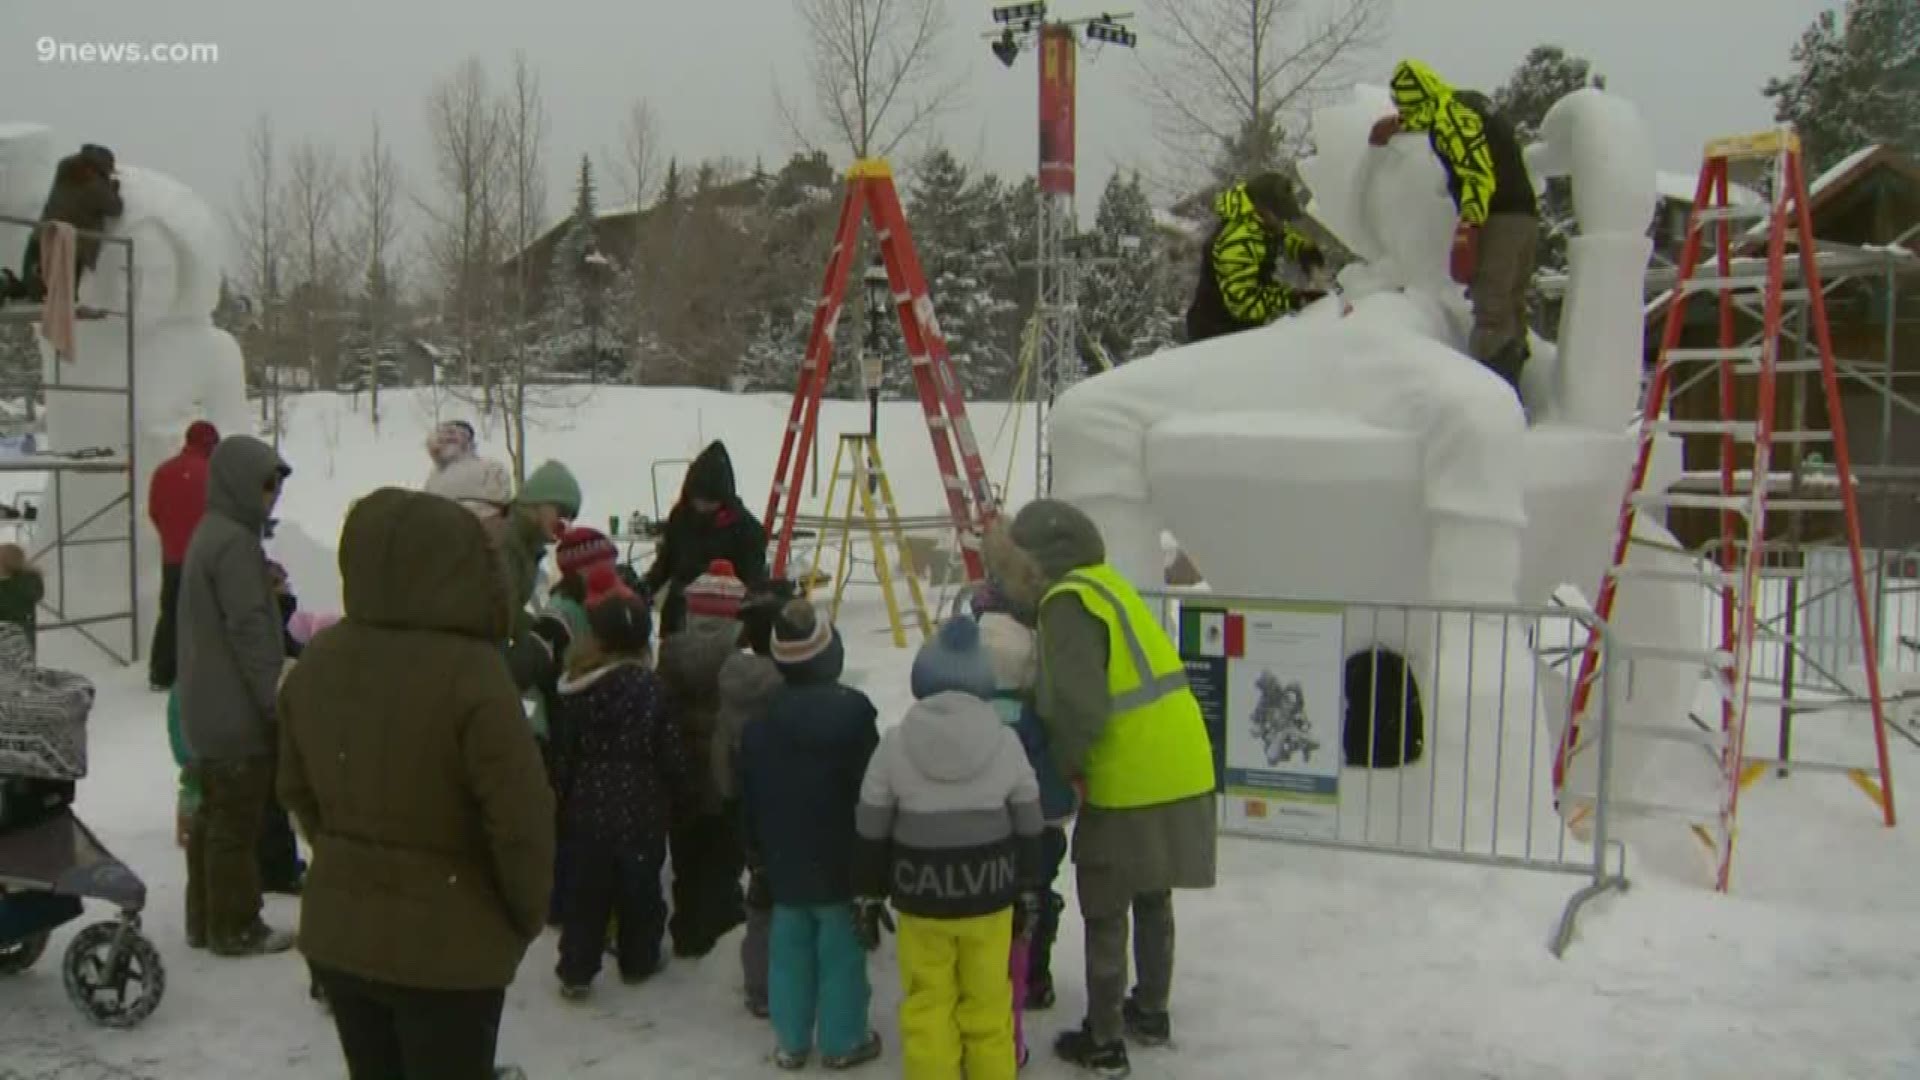 16 teams from around the world are competing to create the best piece of art out of massive blocks of snow.